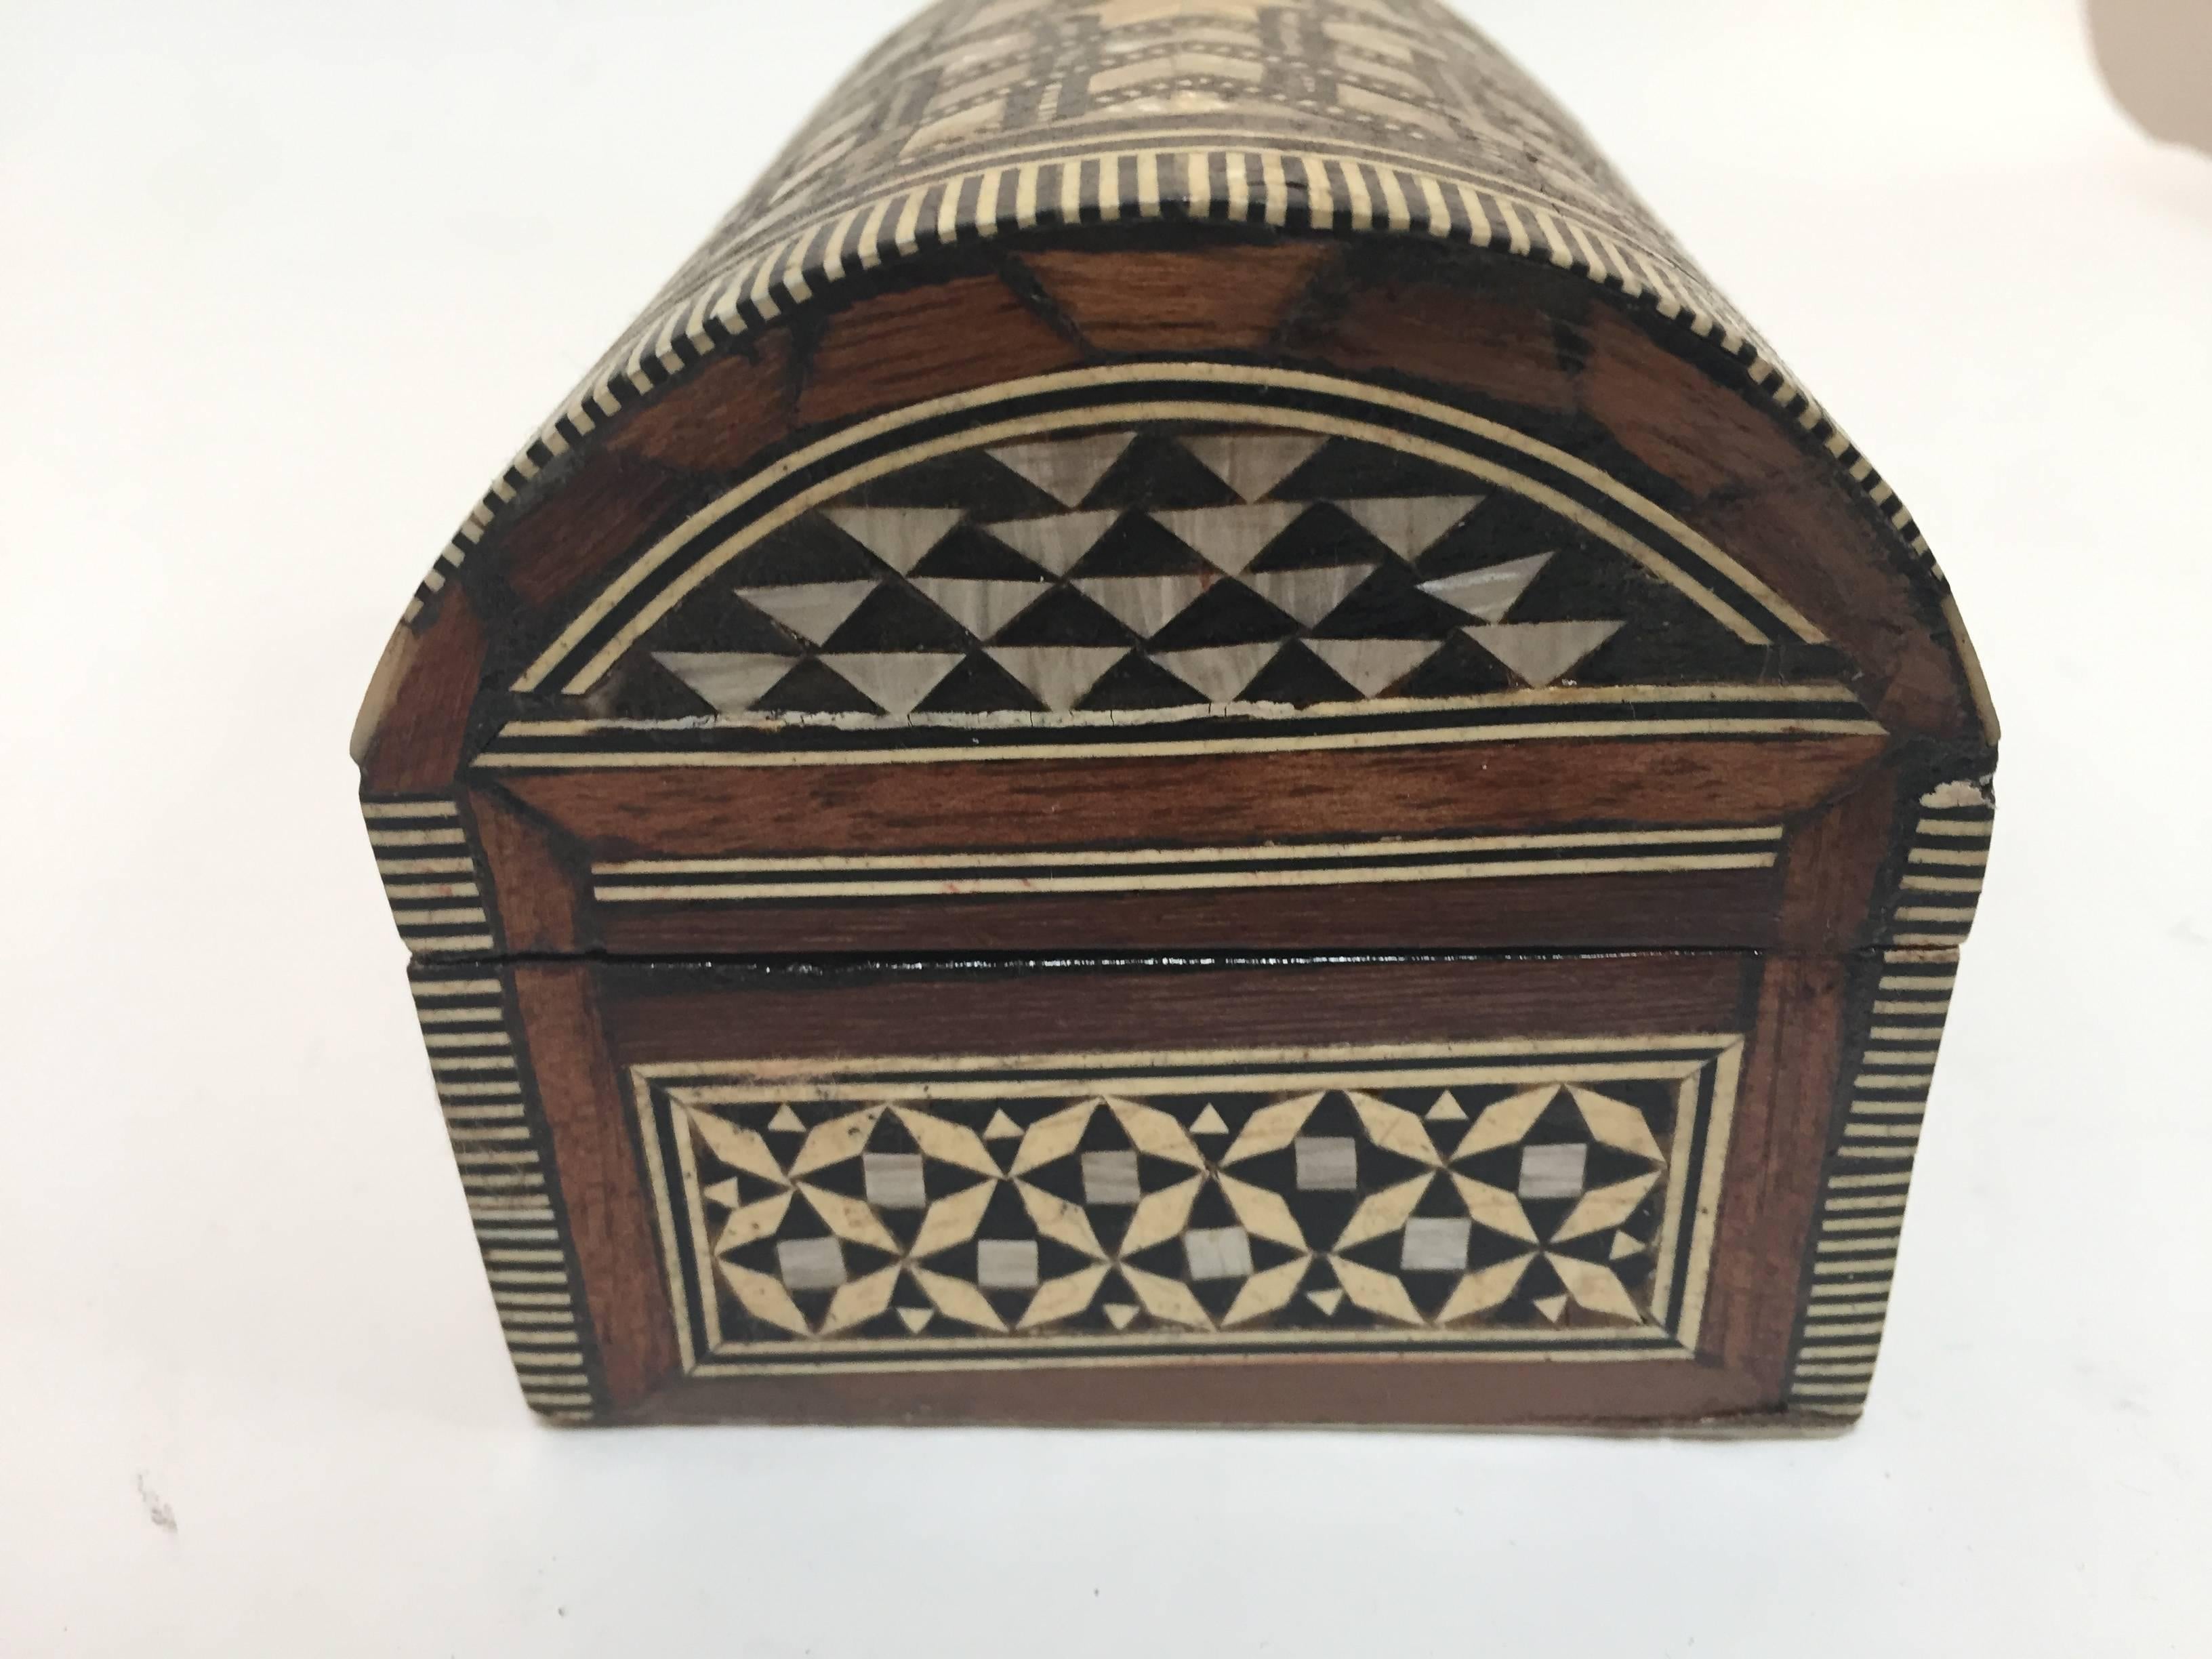 Hand-Crafted Middle Eastern Syrian Mother-of-Pearl Inlaid Jewelry Box